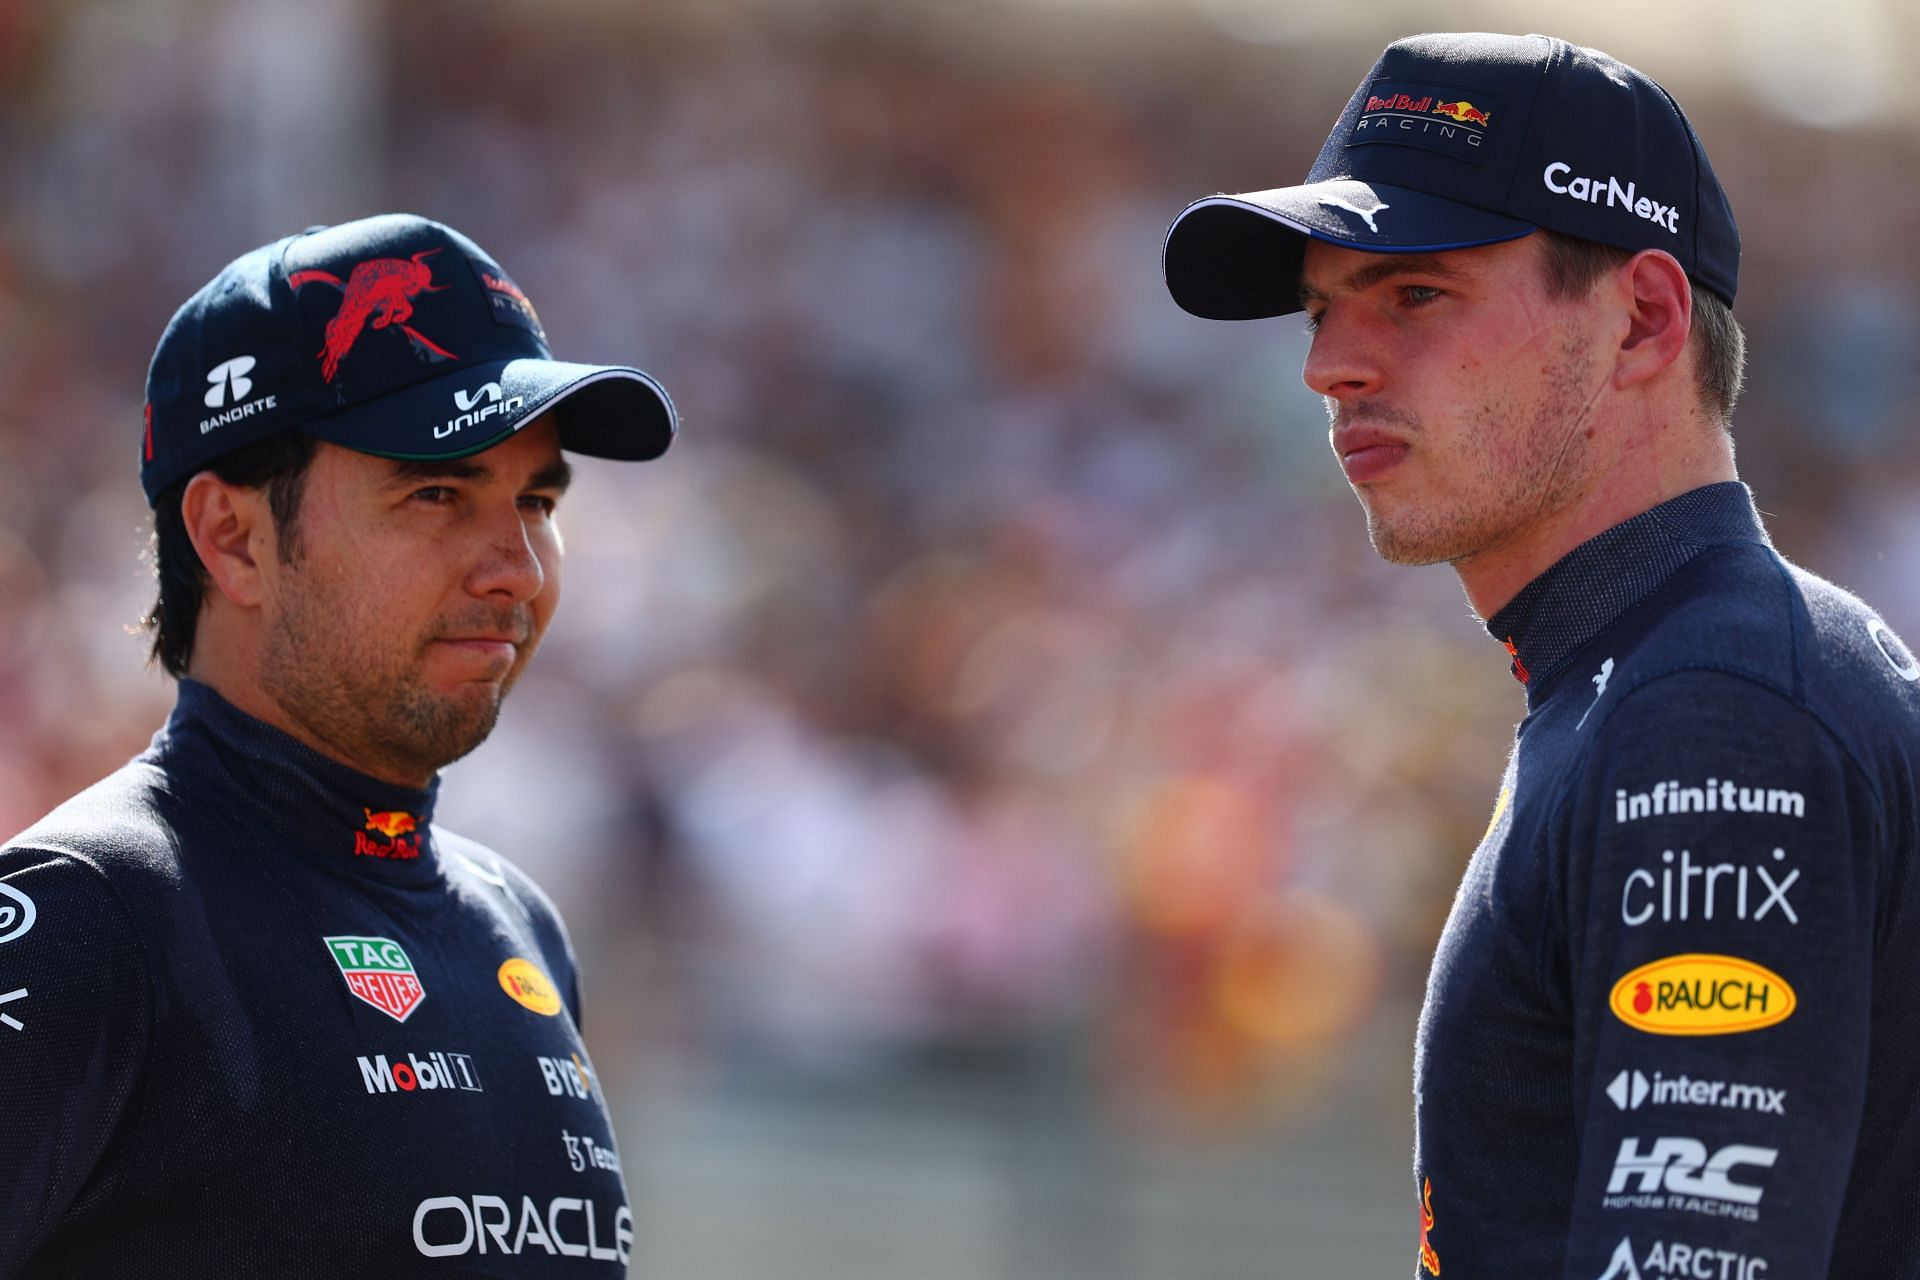 Max Verstappen and Sergio Perez at the F1 Grand Prix of France at Circuit Paul Ricard on July 23, 2022 in Le Castellet, France. (Photo by Mark Thompson/Getty Images)